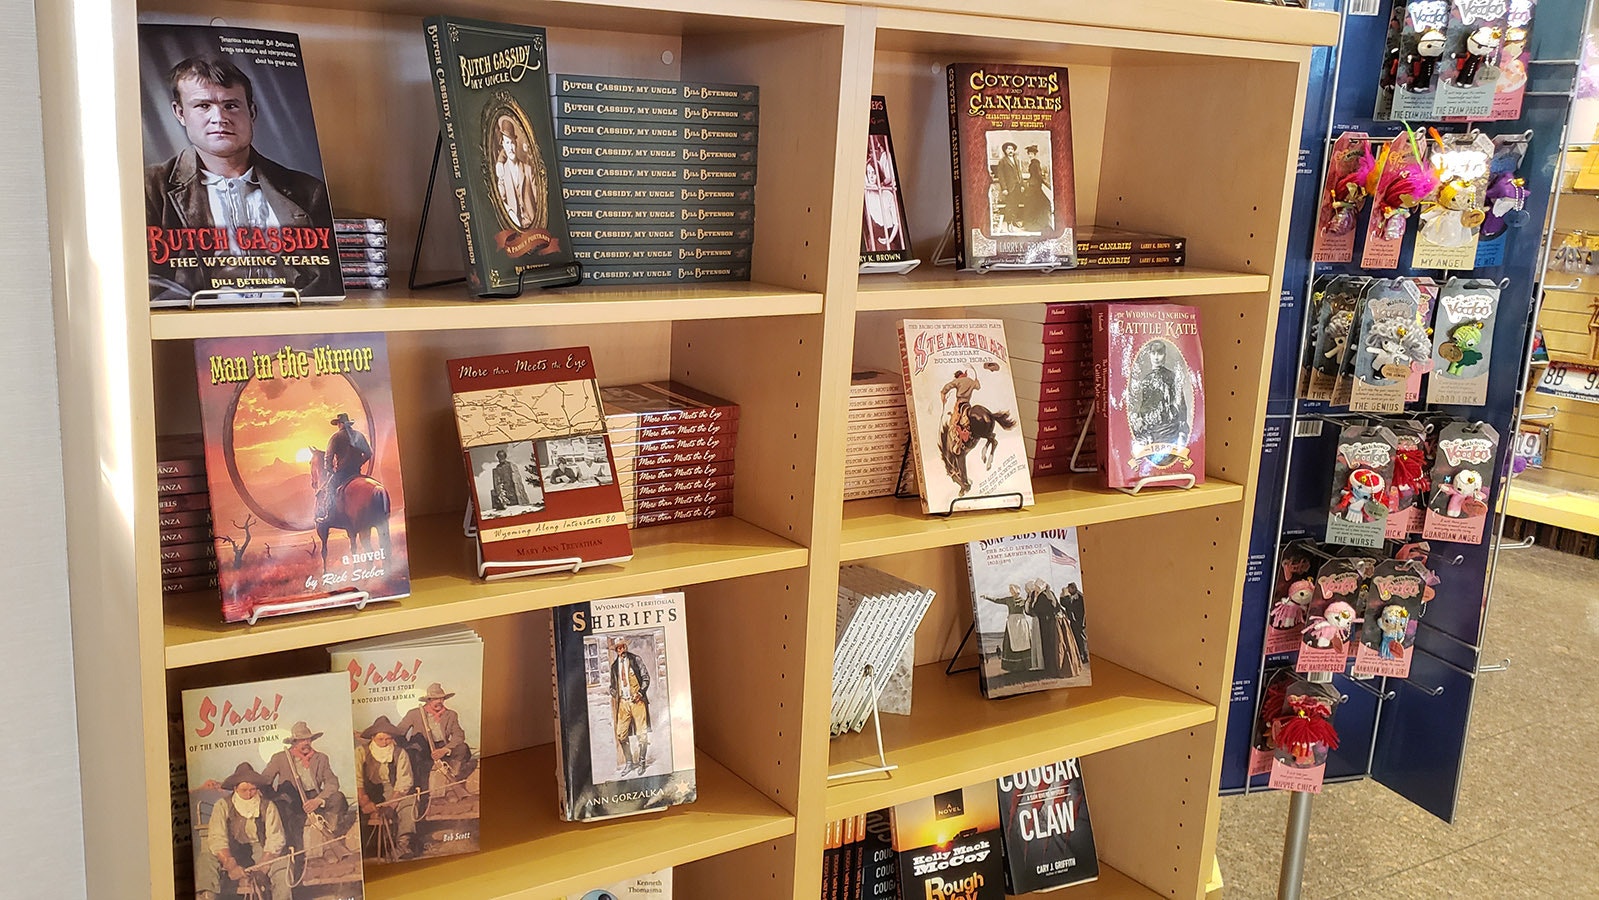 Books about Butch Cassidy and other Wyoming and Western outlaws and characters are for sale at Little America, alongside some cute little voodoo dolls. You never know what you're going to find at the Little America travel store.